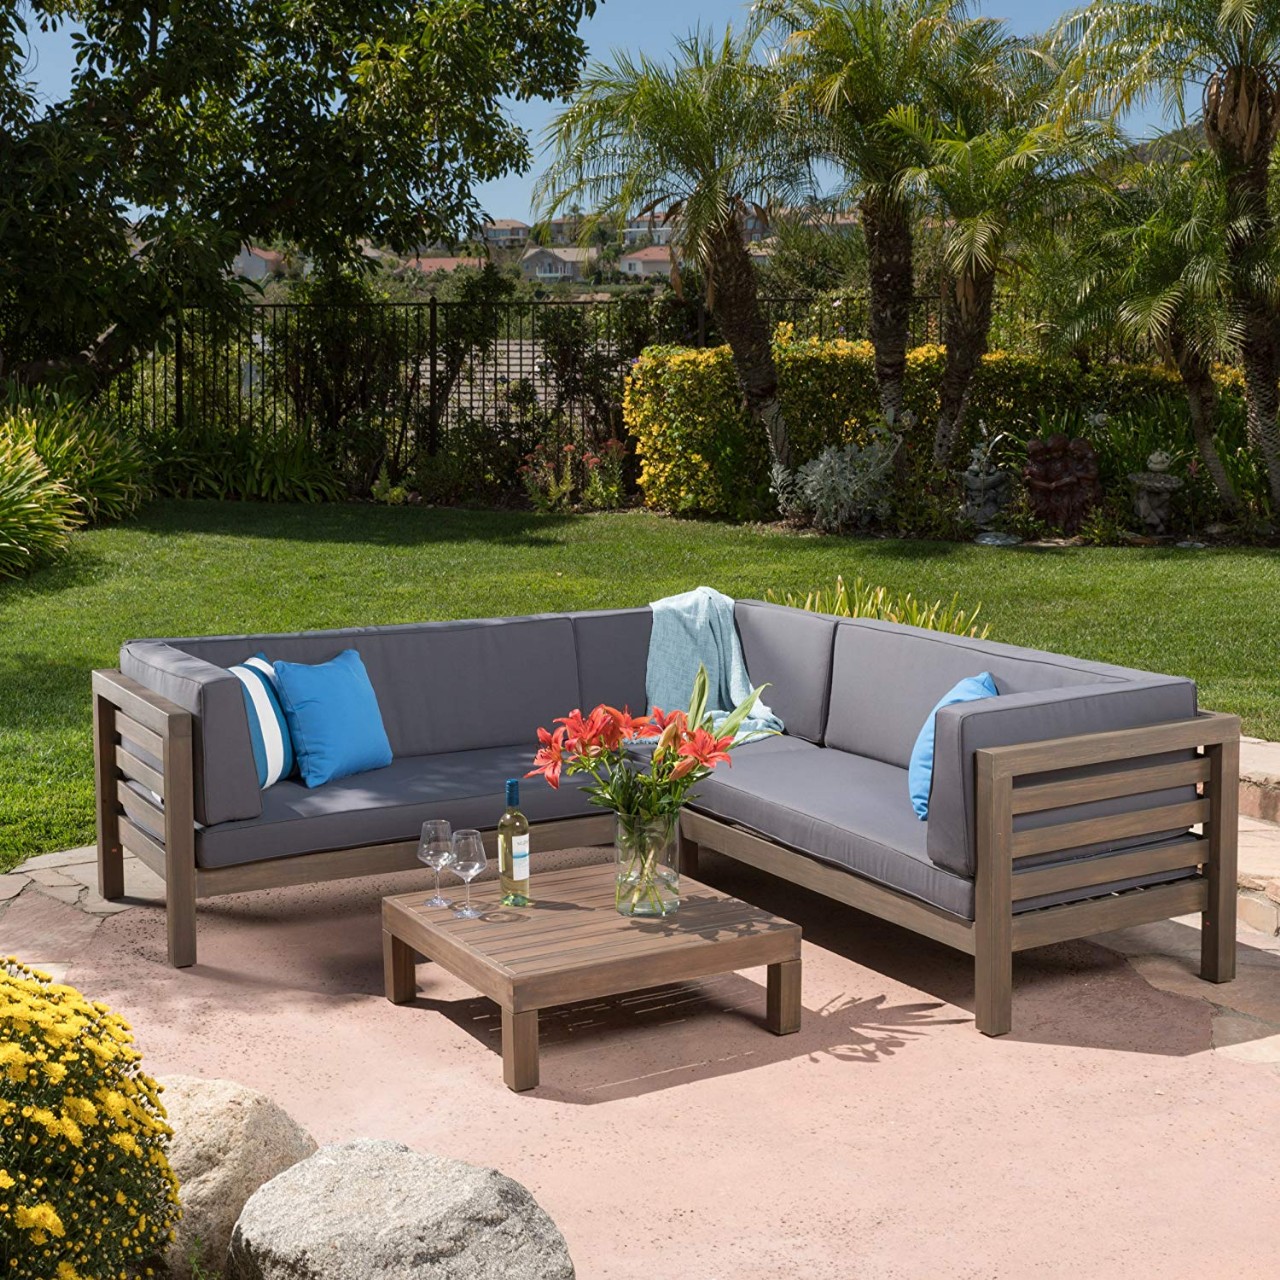 Outdoor Patio Furniture 4 Piece Wooden Sectional Sofa Set w/Water Resistant Cushions (Grey)